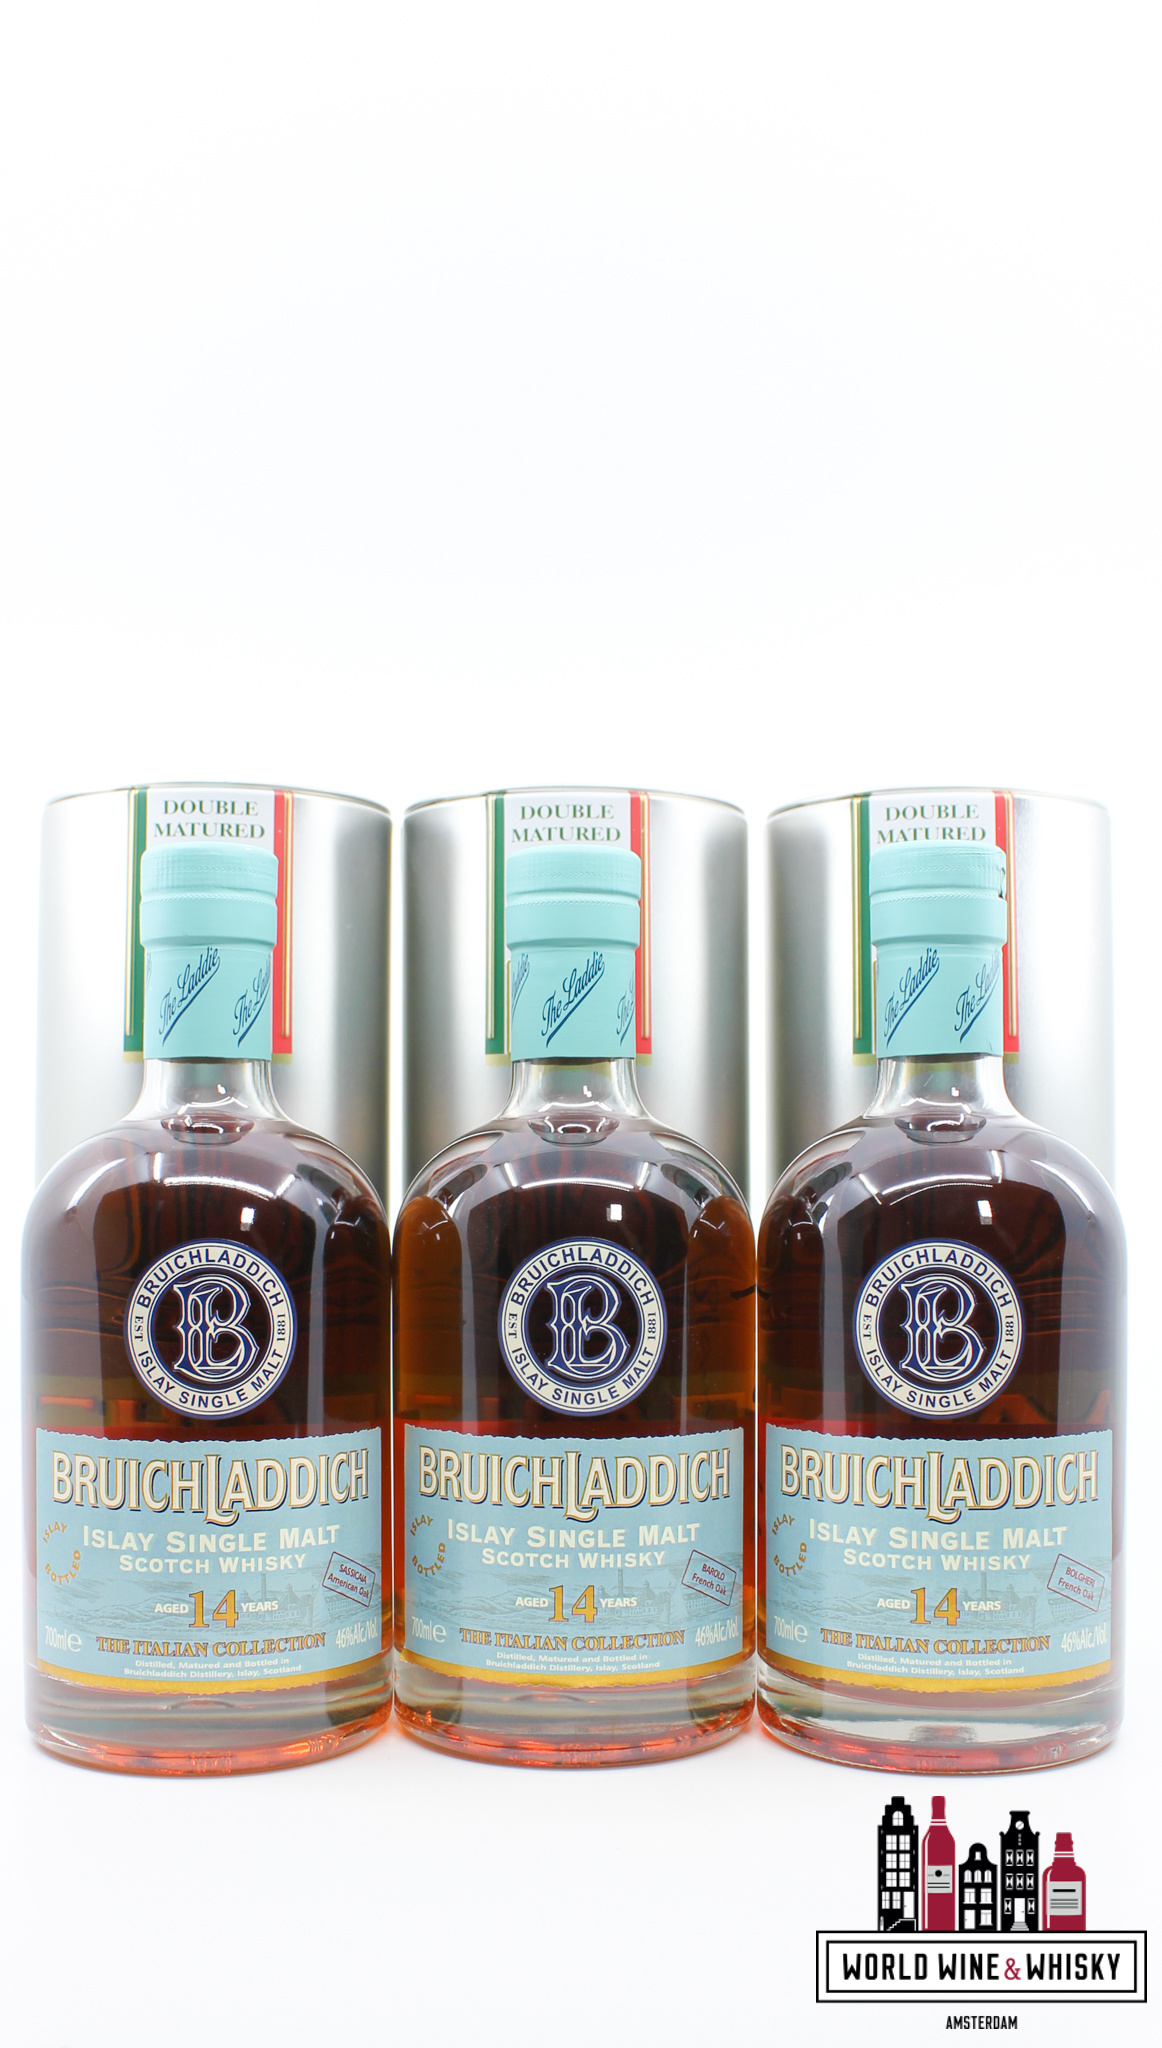 Bruichladdich Bruichladdich 14 Years Old 1993 2007 - The Italian Collection 46% 1 of 3000 (full set)